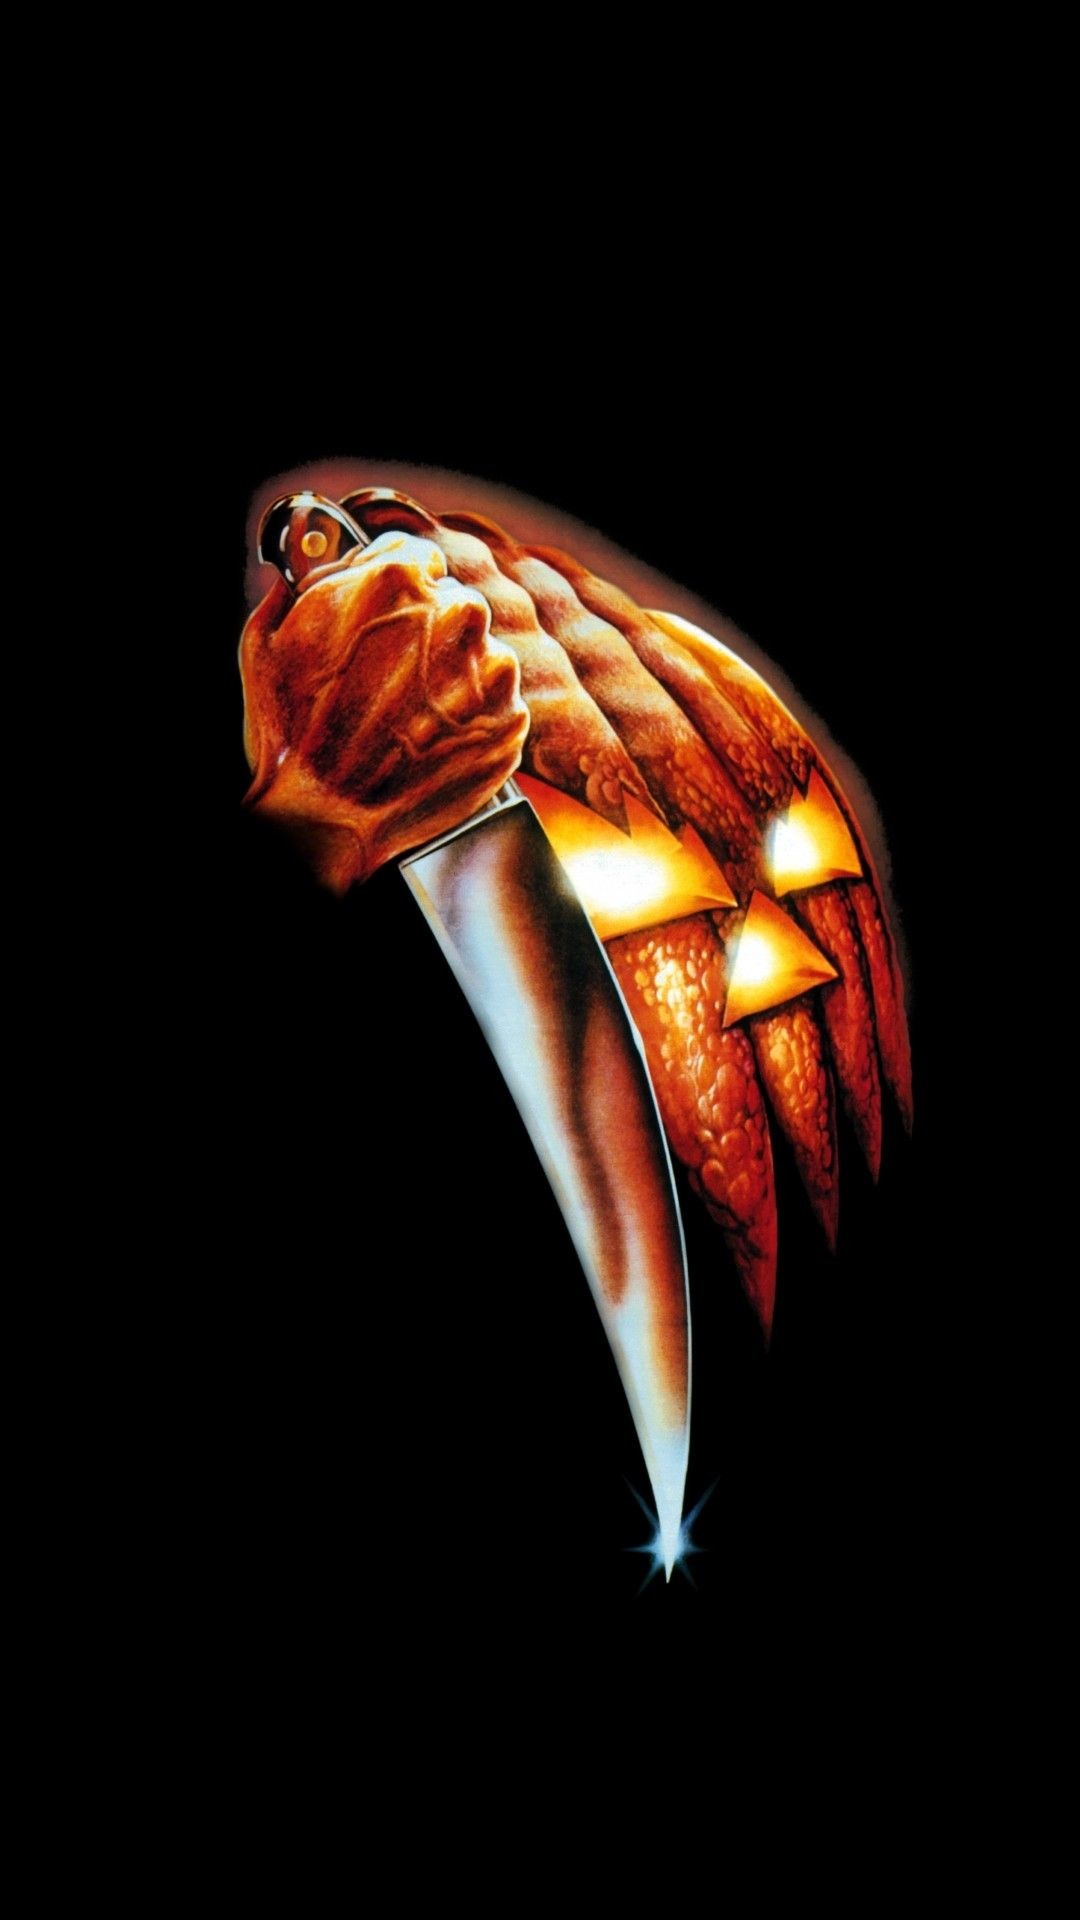 1080x1920  Horror Movies Wallpaper iPhone (44+ images)